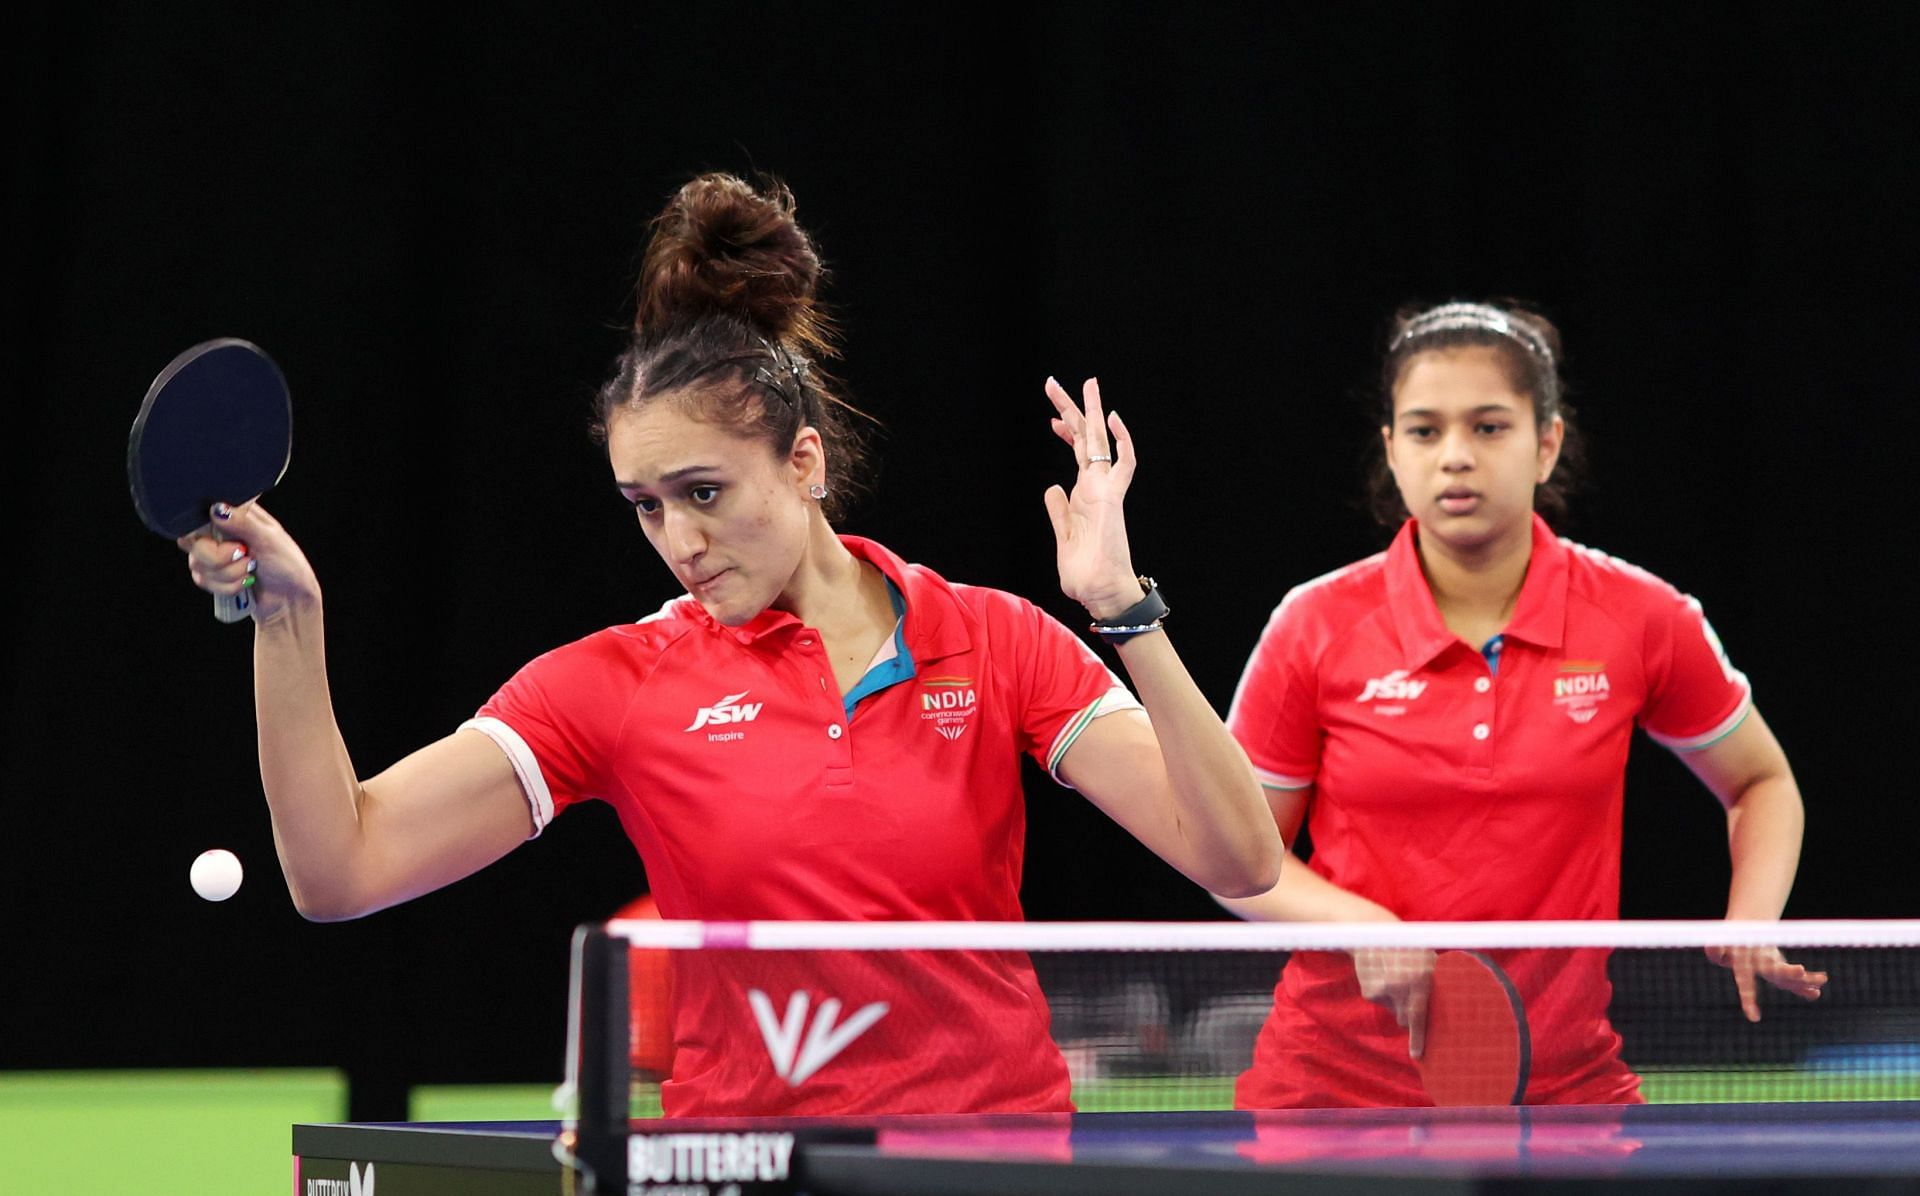 Indian table tennis players Manika Batra (left) and Diya Chitale at CWG 2022. (PC: Getty Images)